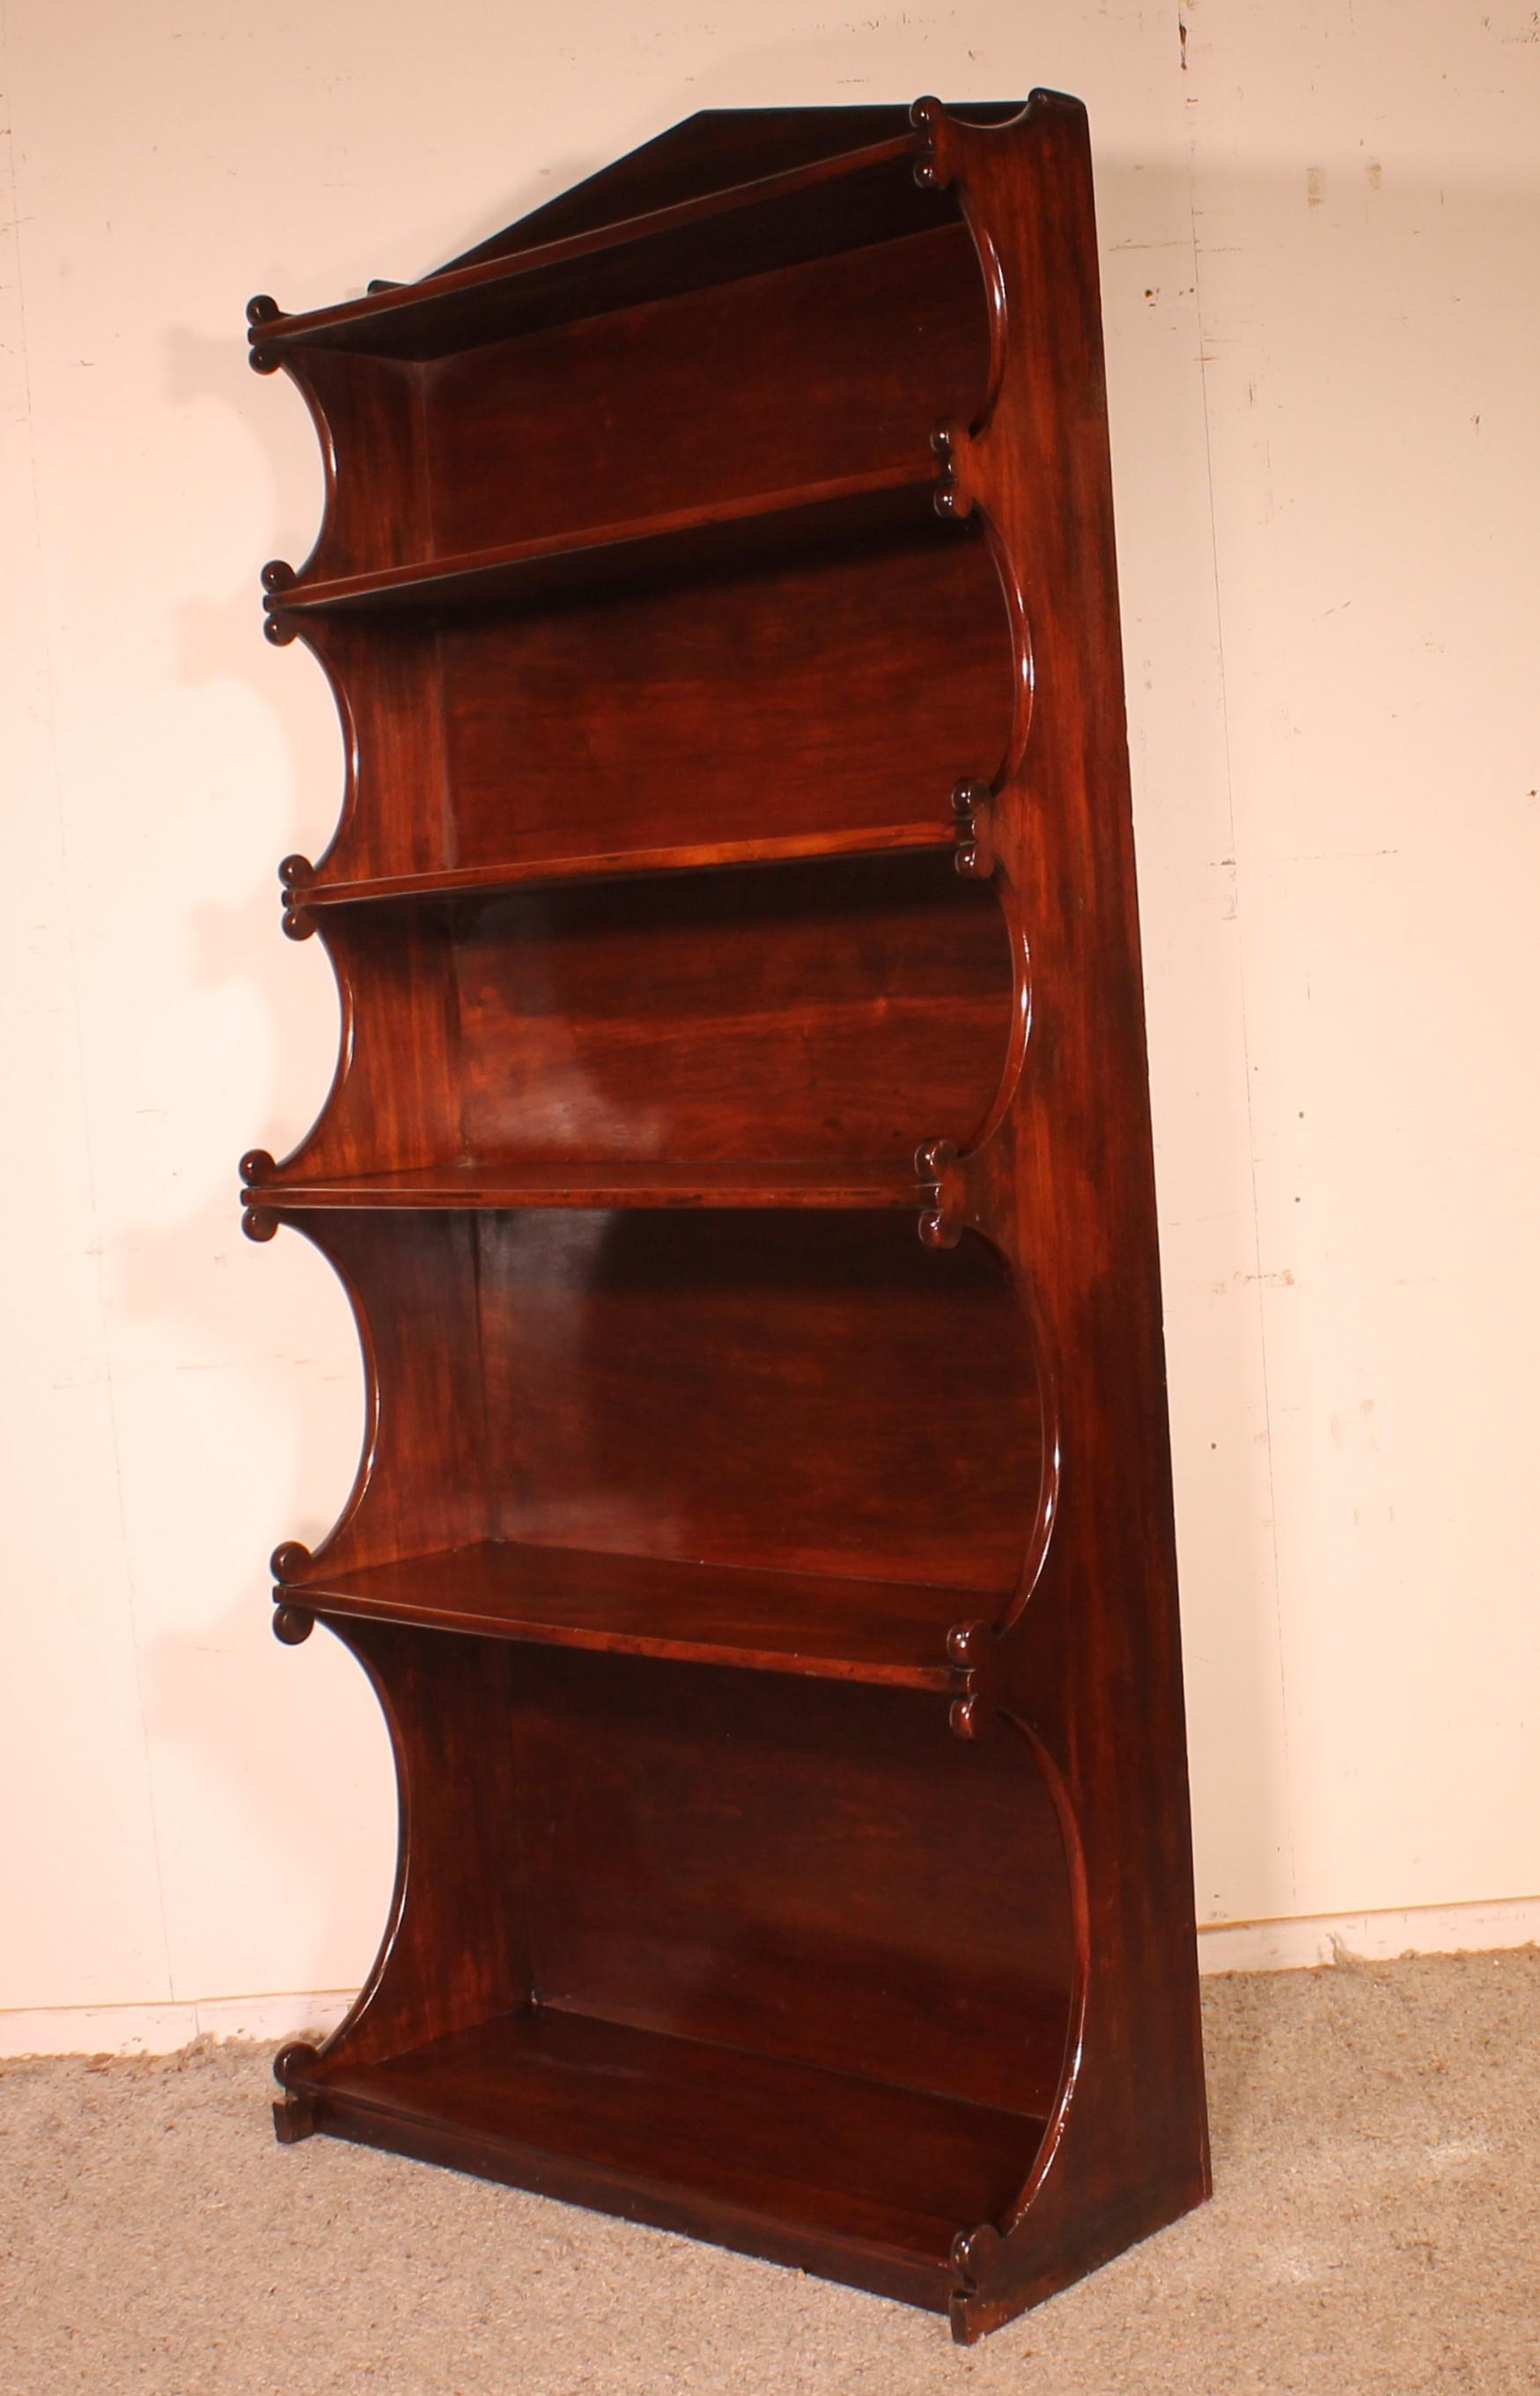 Elegant open bookcase from the 19th century from England called waterfall since the depth of the shelves decreases from bottom to top. The height also decreases which allows you to put large books or objects at the bottom and smaller ones at the